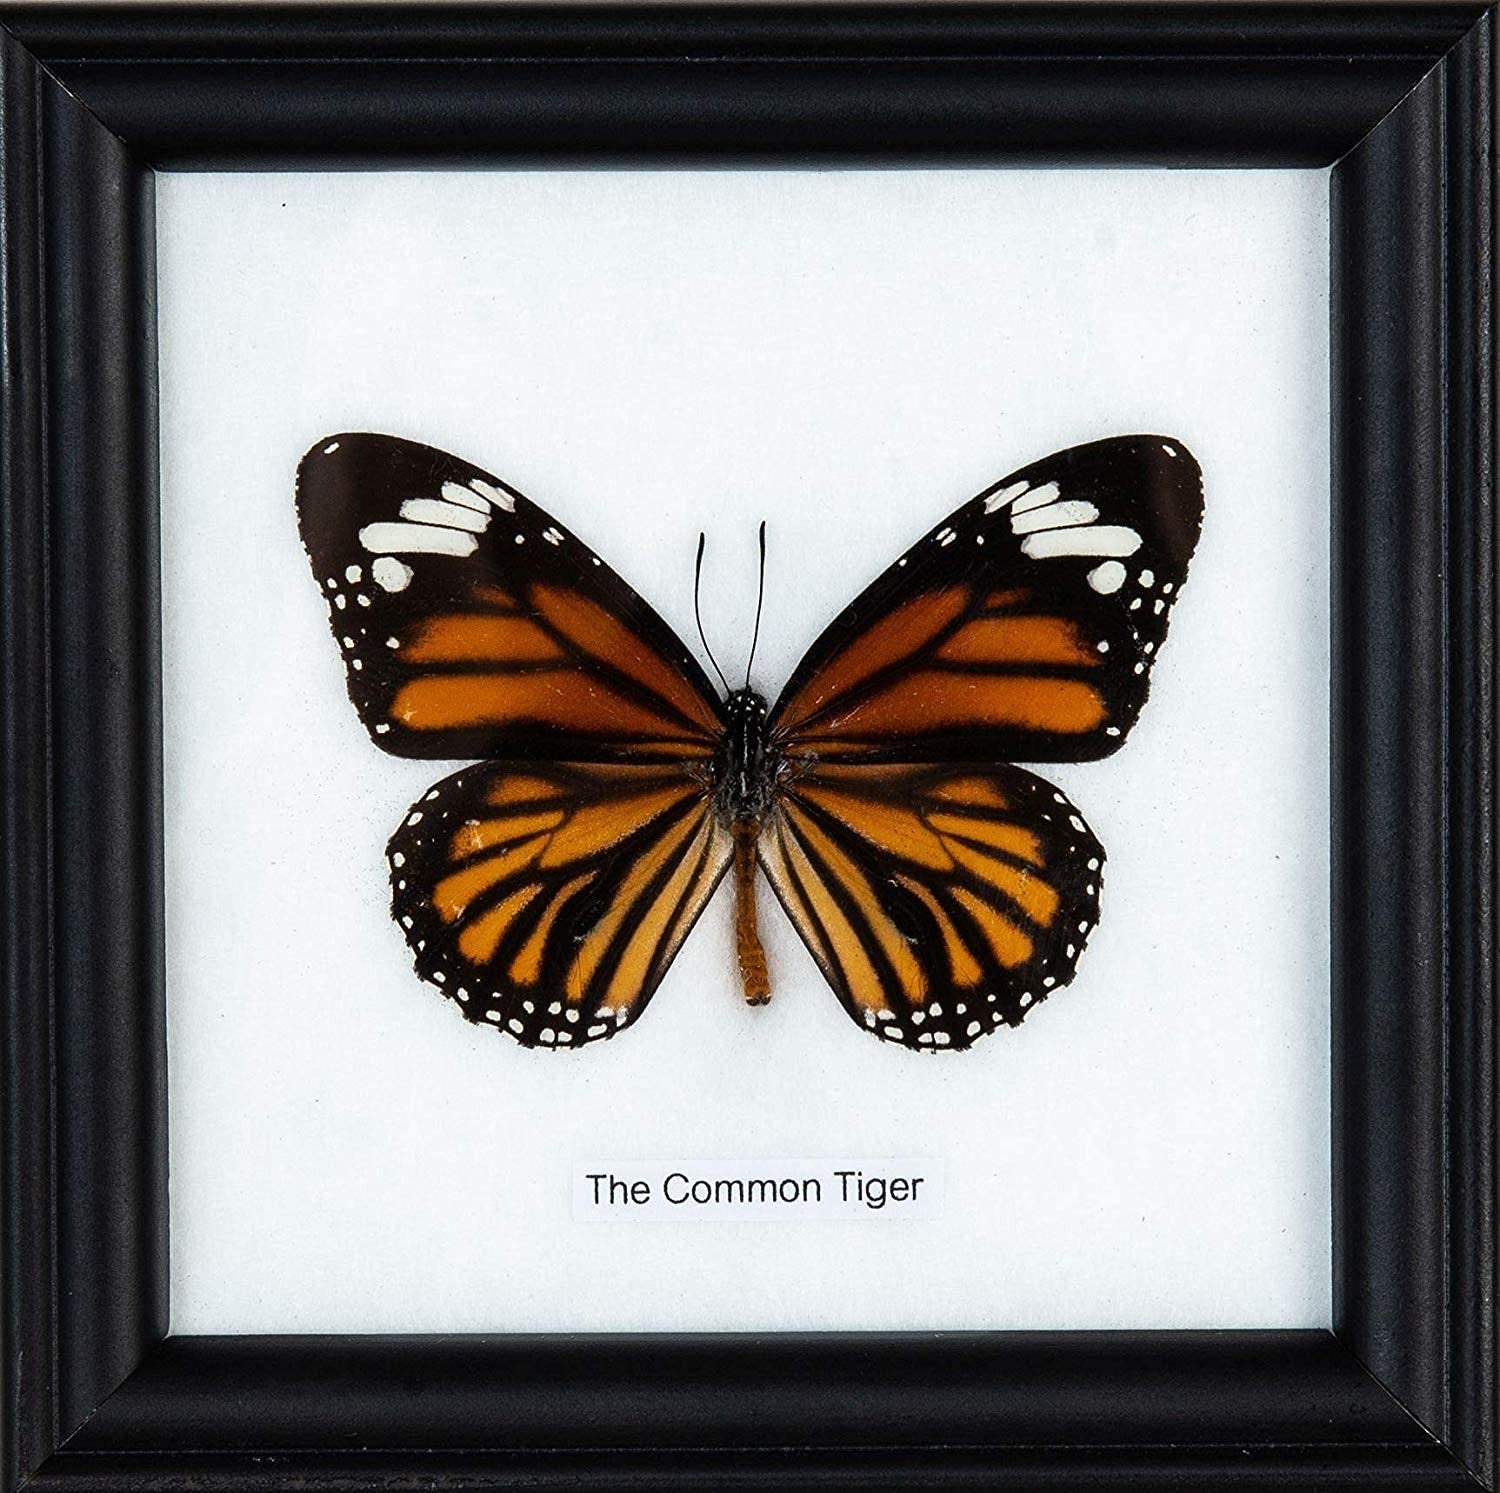 The Common Tiger Butterflies (Danaus genutia) Wall Hanging Frame 5x5 in.